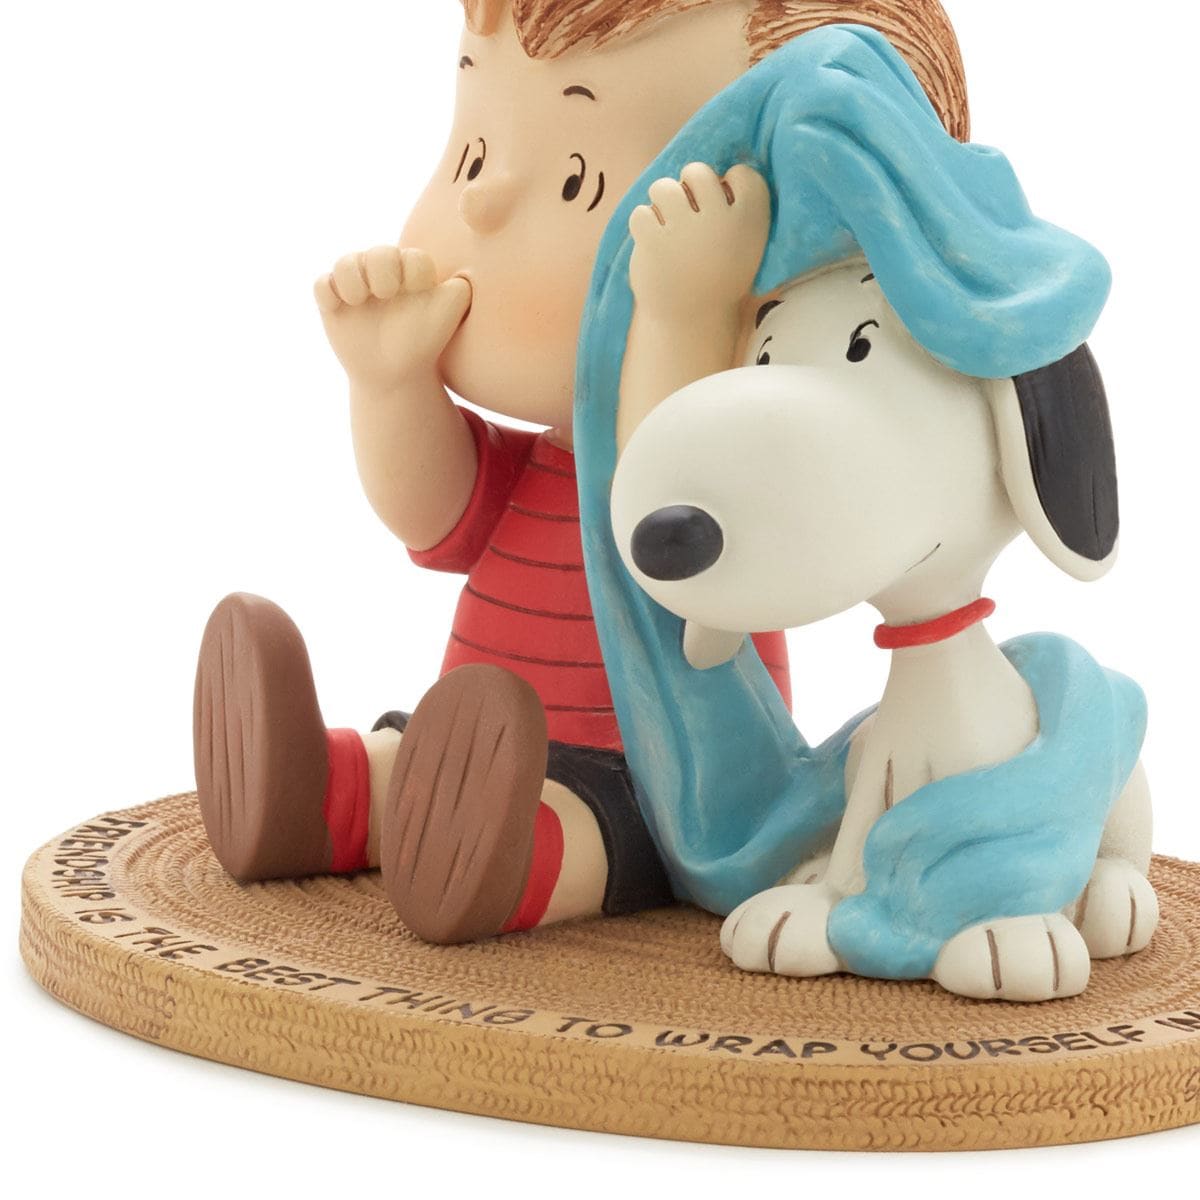 Peanuts Linus and Snoopy Wrapped in Friendship Mini Figurine